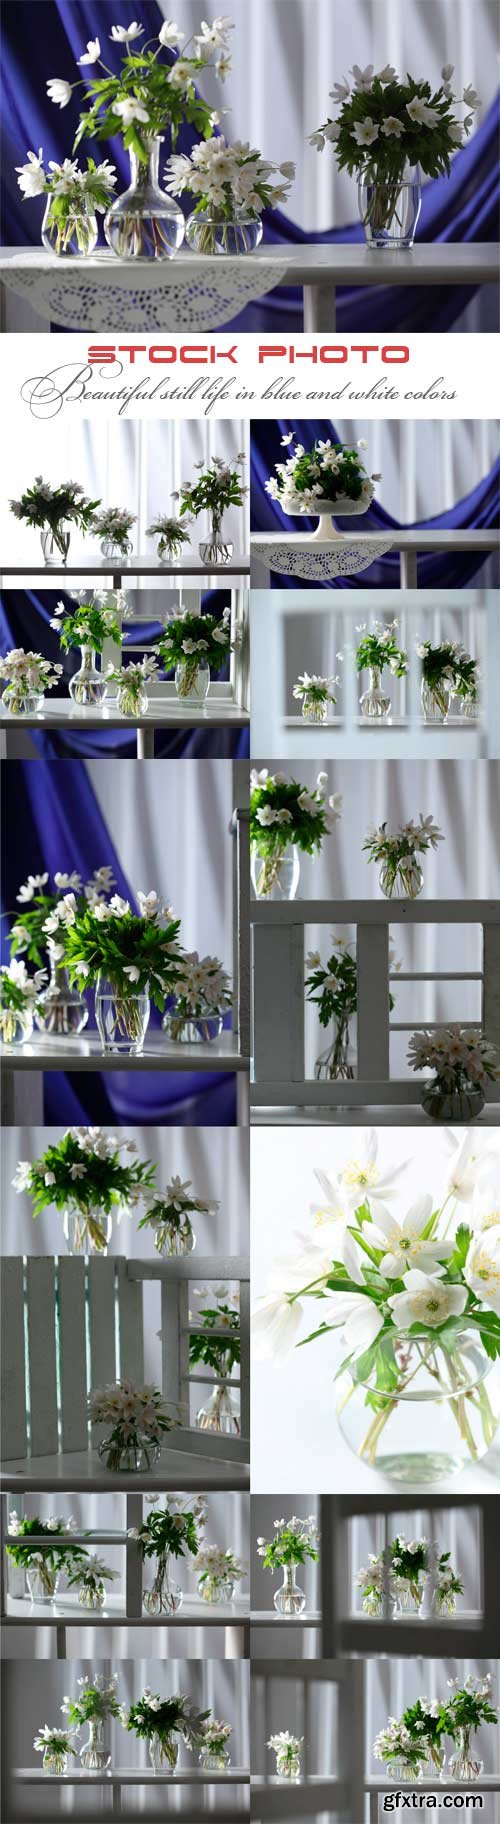 Beautiful still life in blue and white colors